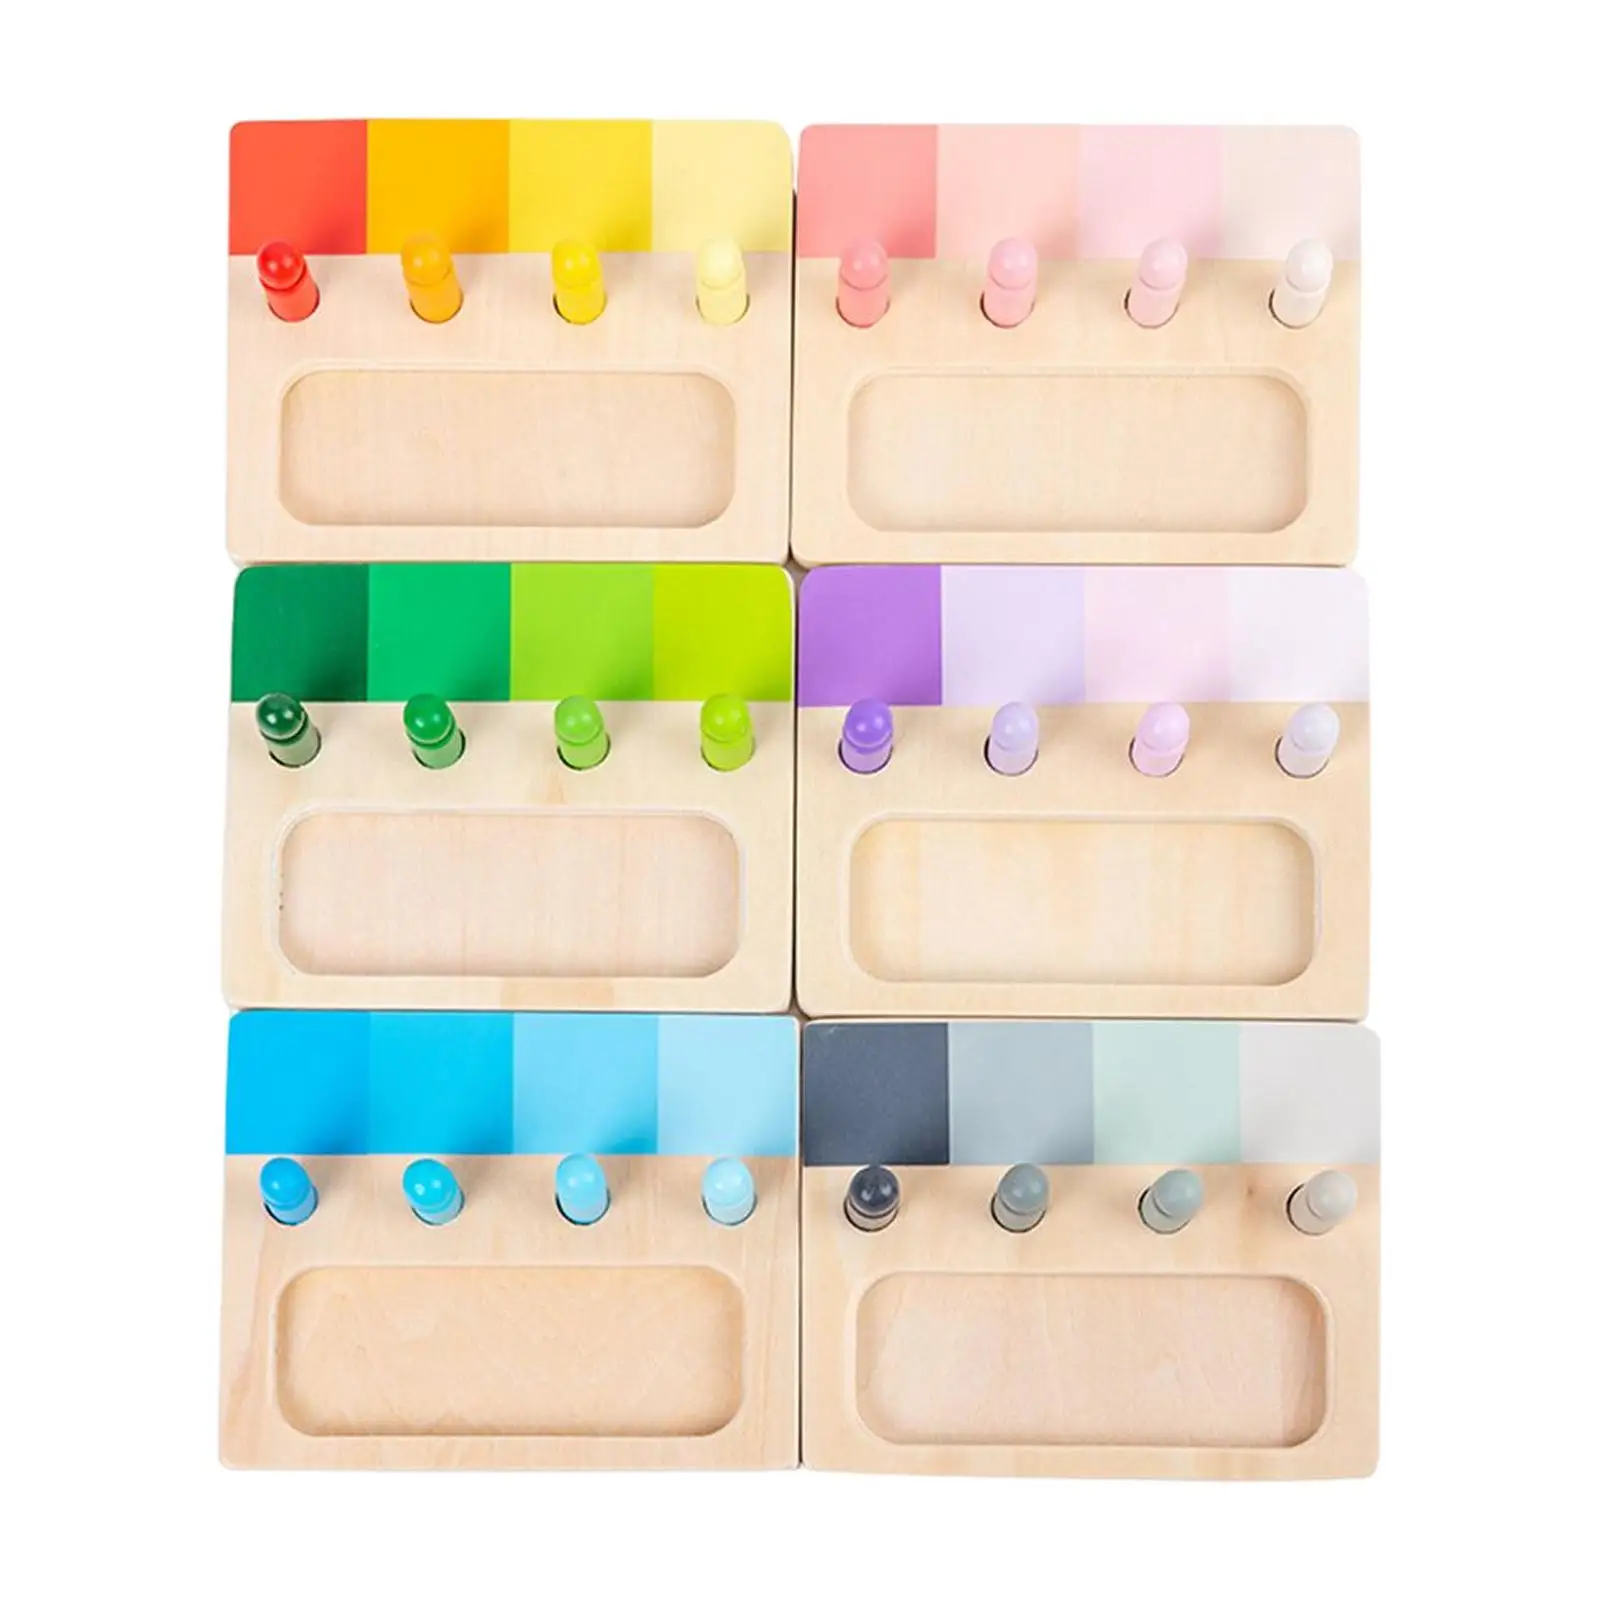 6x Color Resemblance Sorting Task Devlopment Toy Educational for Exercise